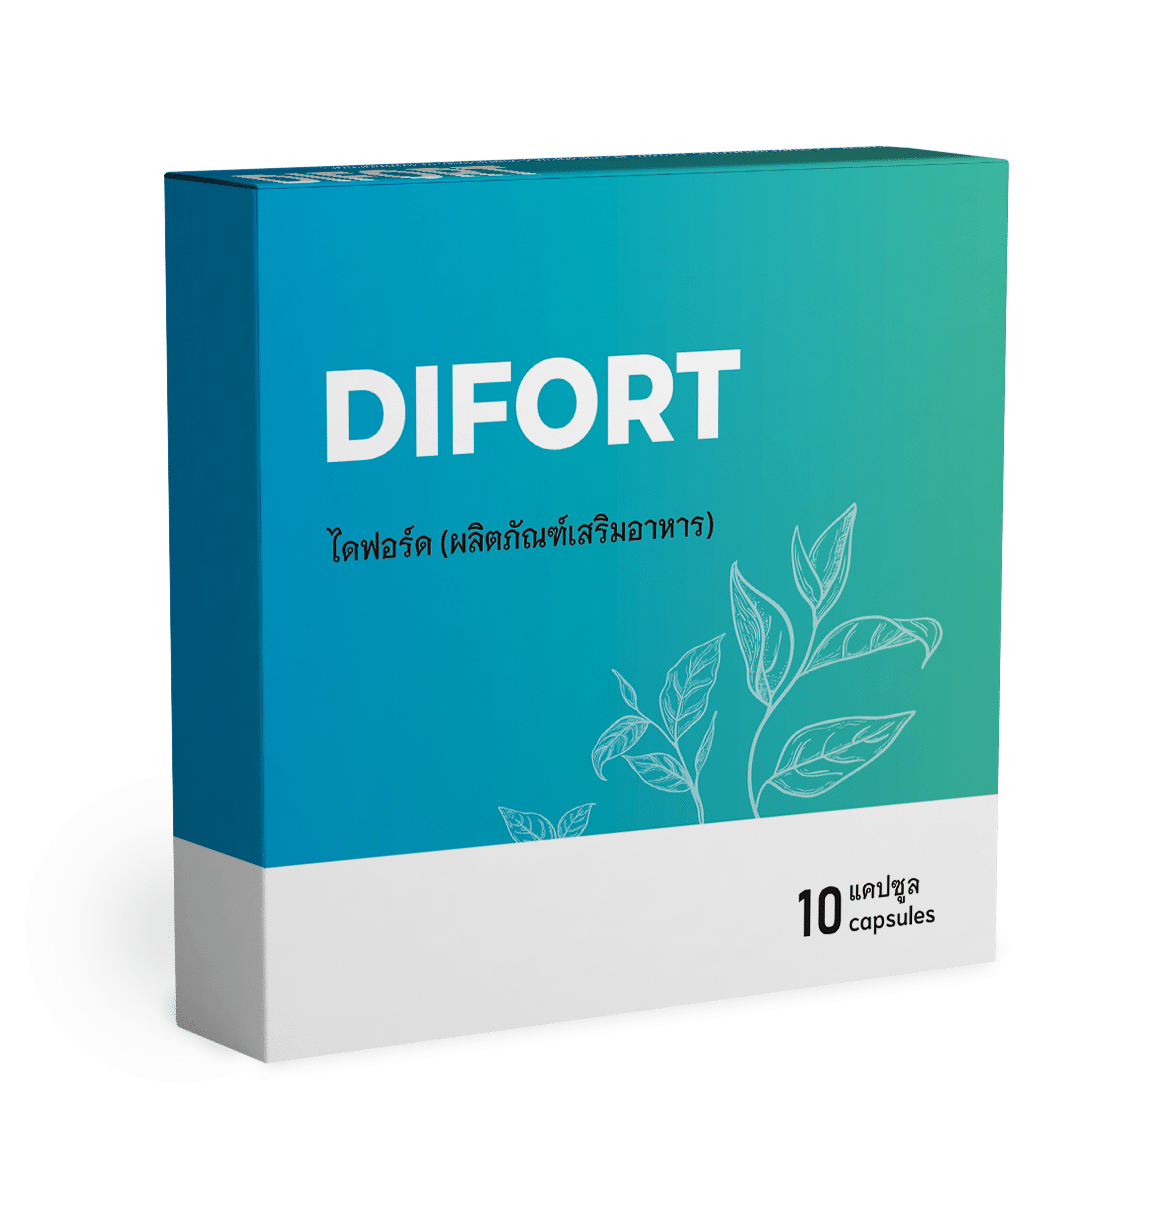 Difort what is it?